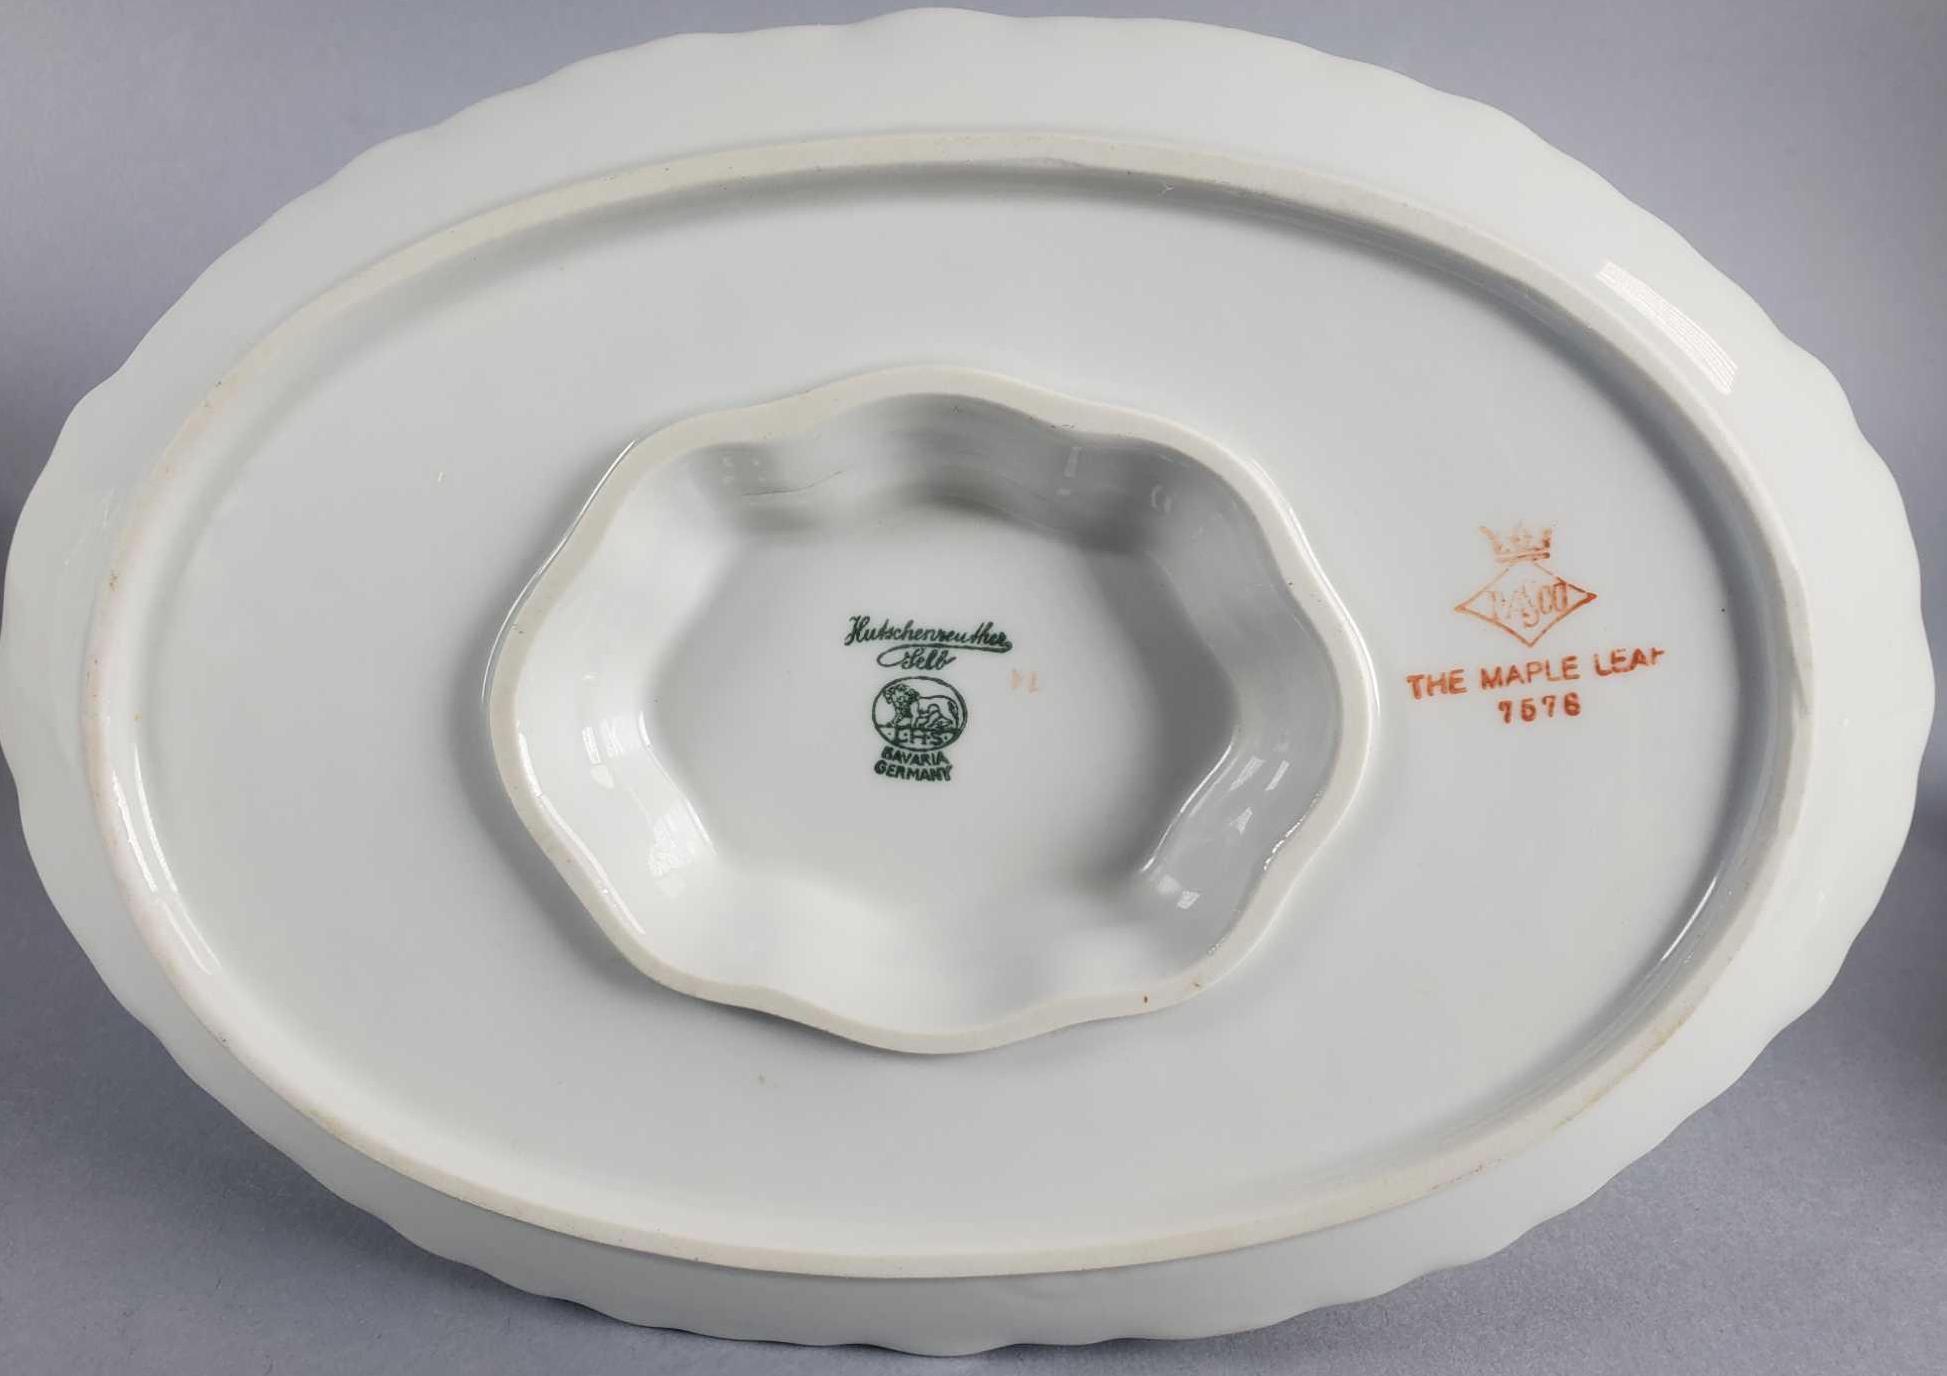 (85) Hutchenreuther Selb Pasco China pieces "The Maple Leaf" (LPO)